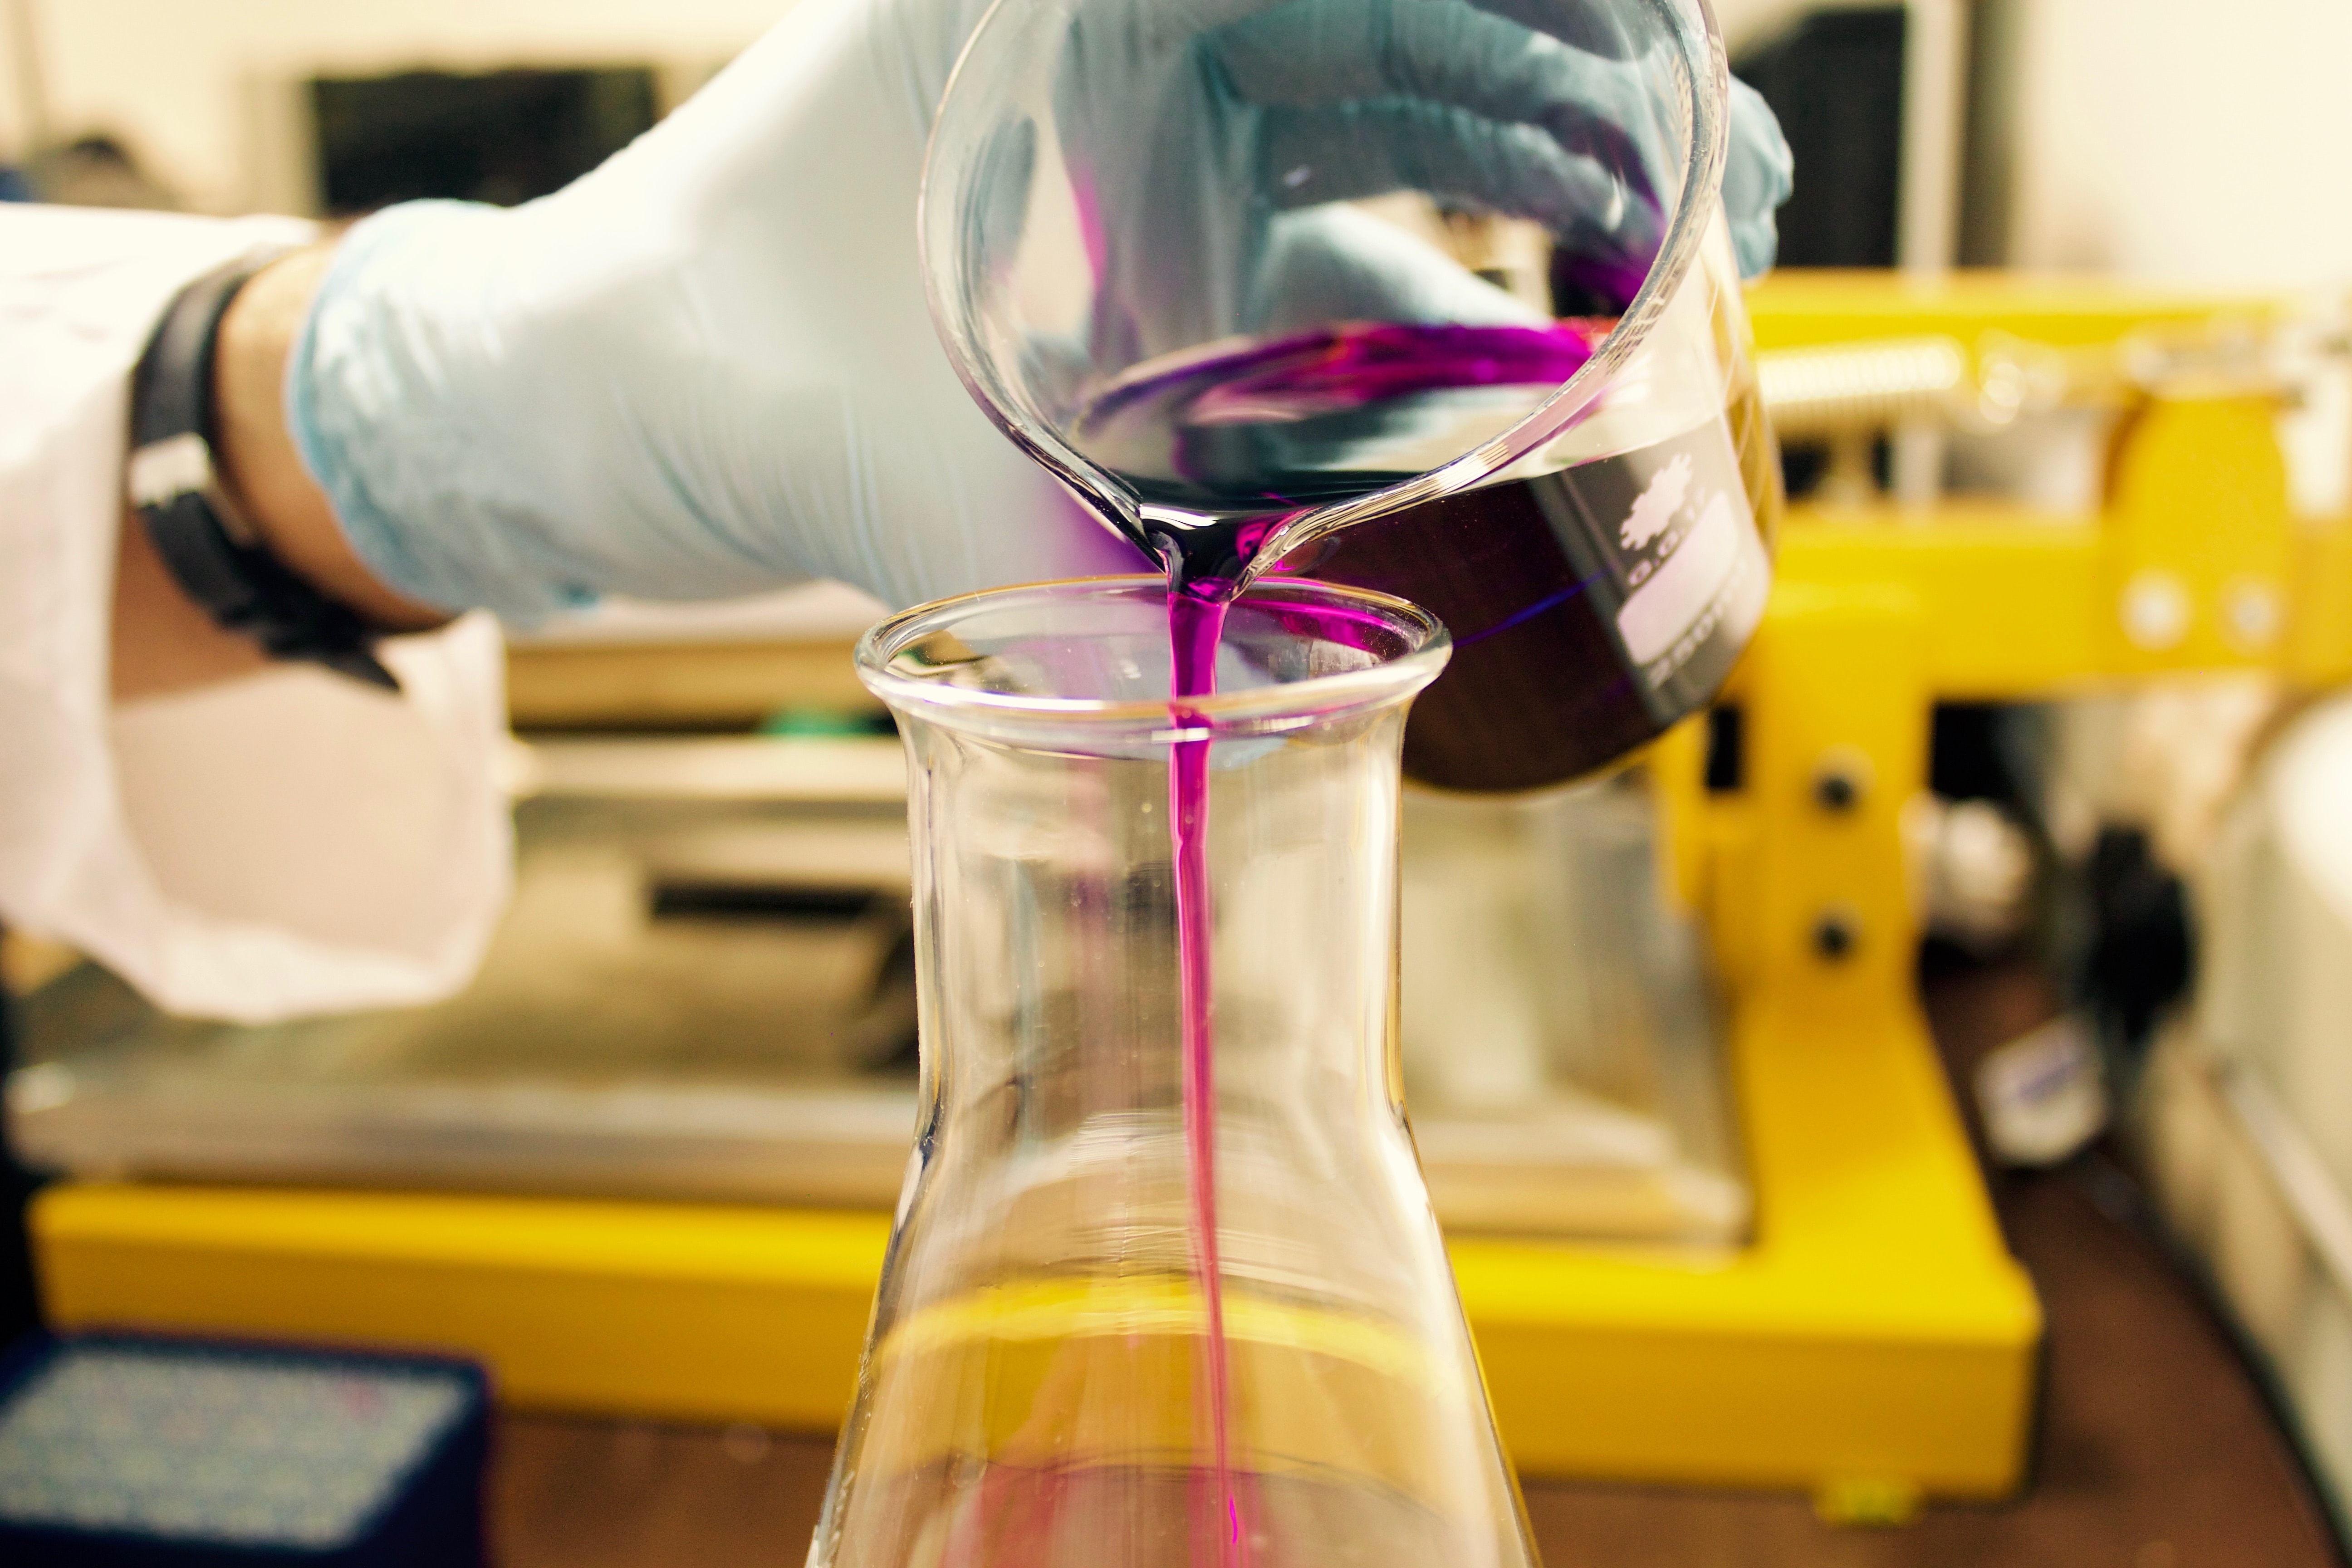 A gloved scientist pours purple liquid from a beaker into a conical flask.